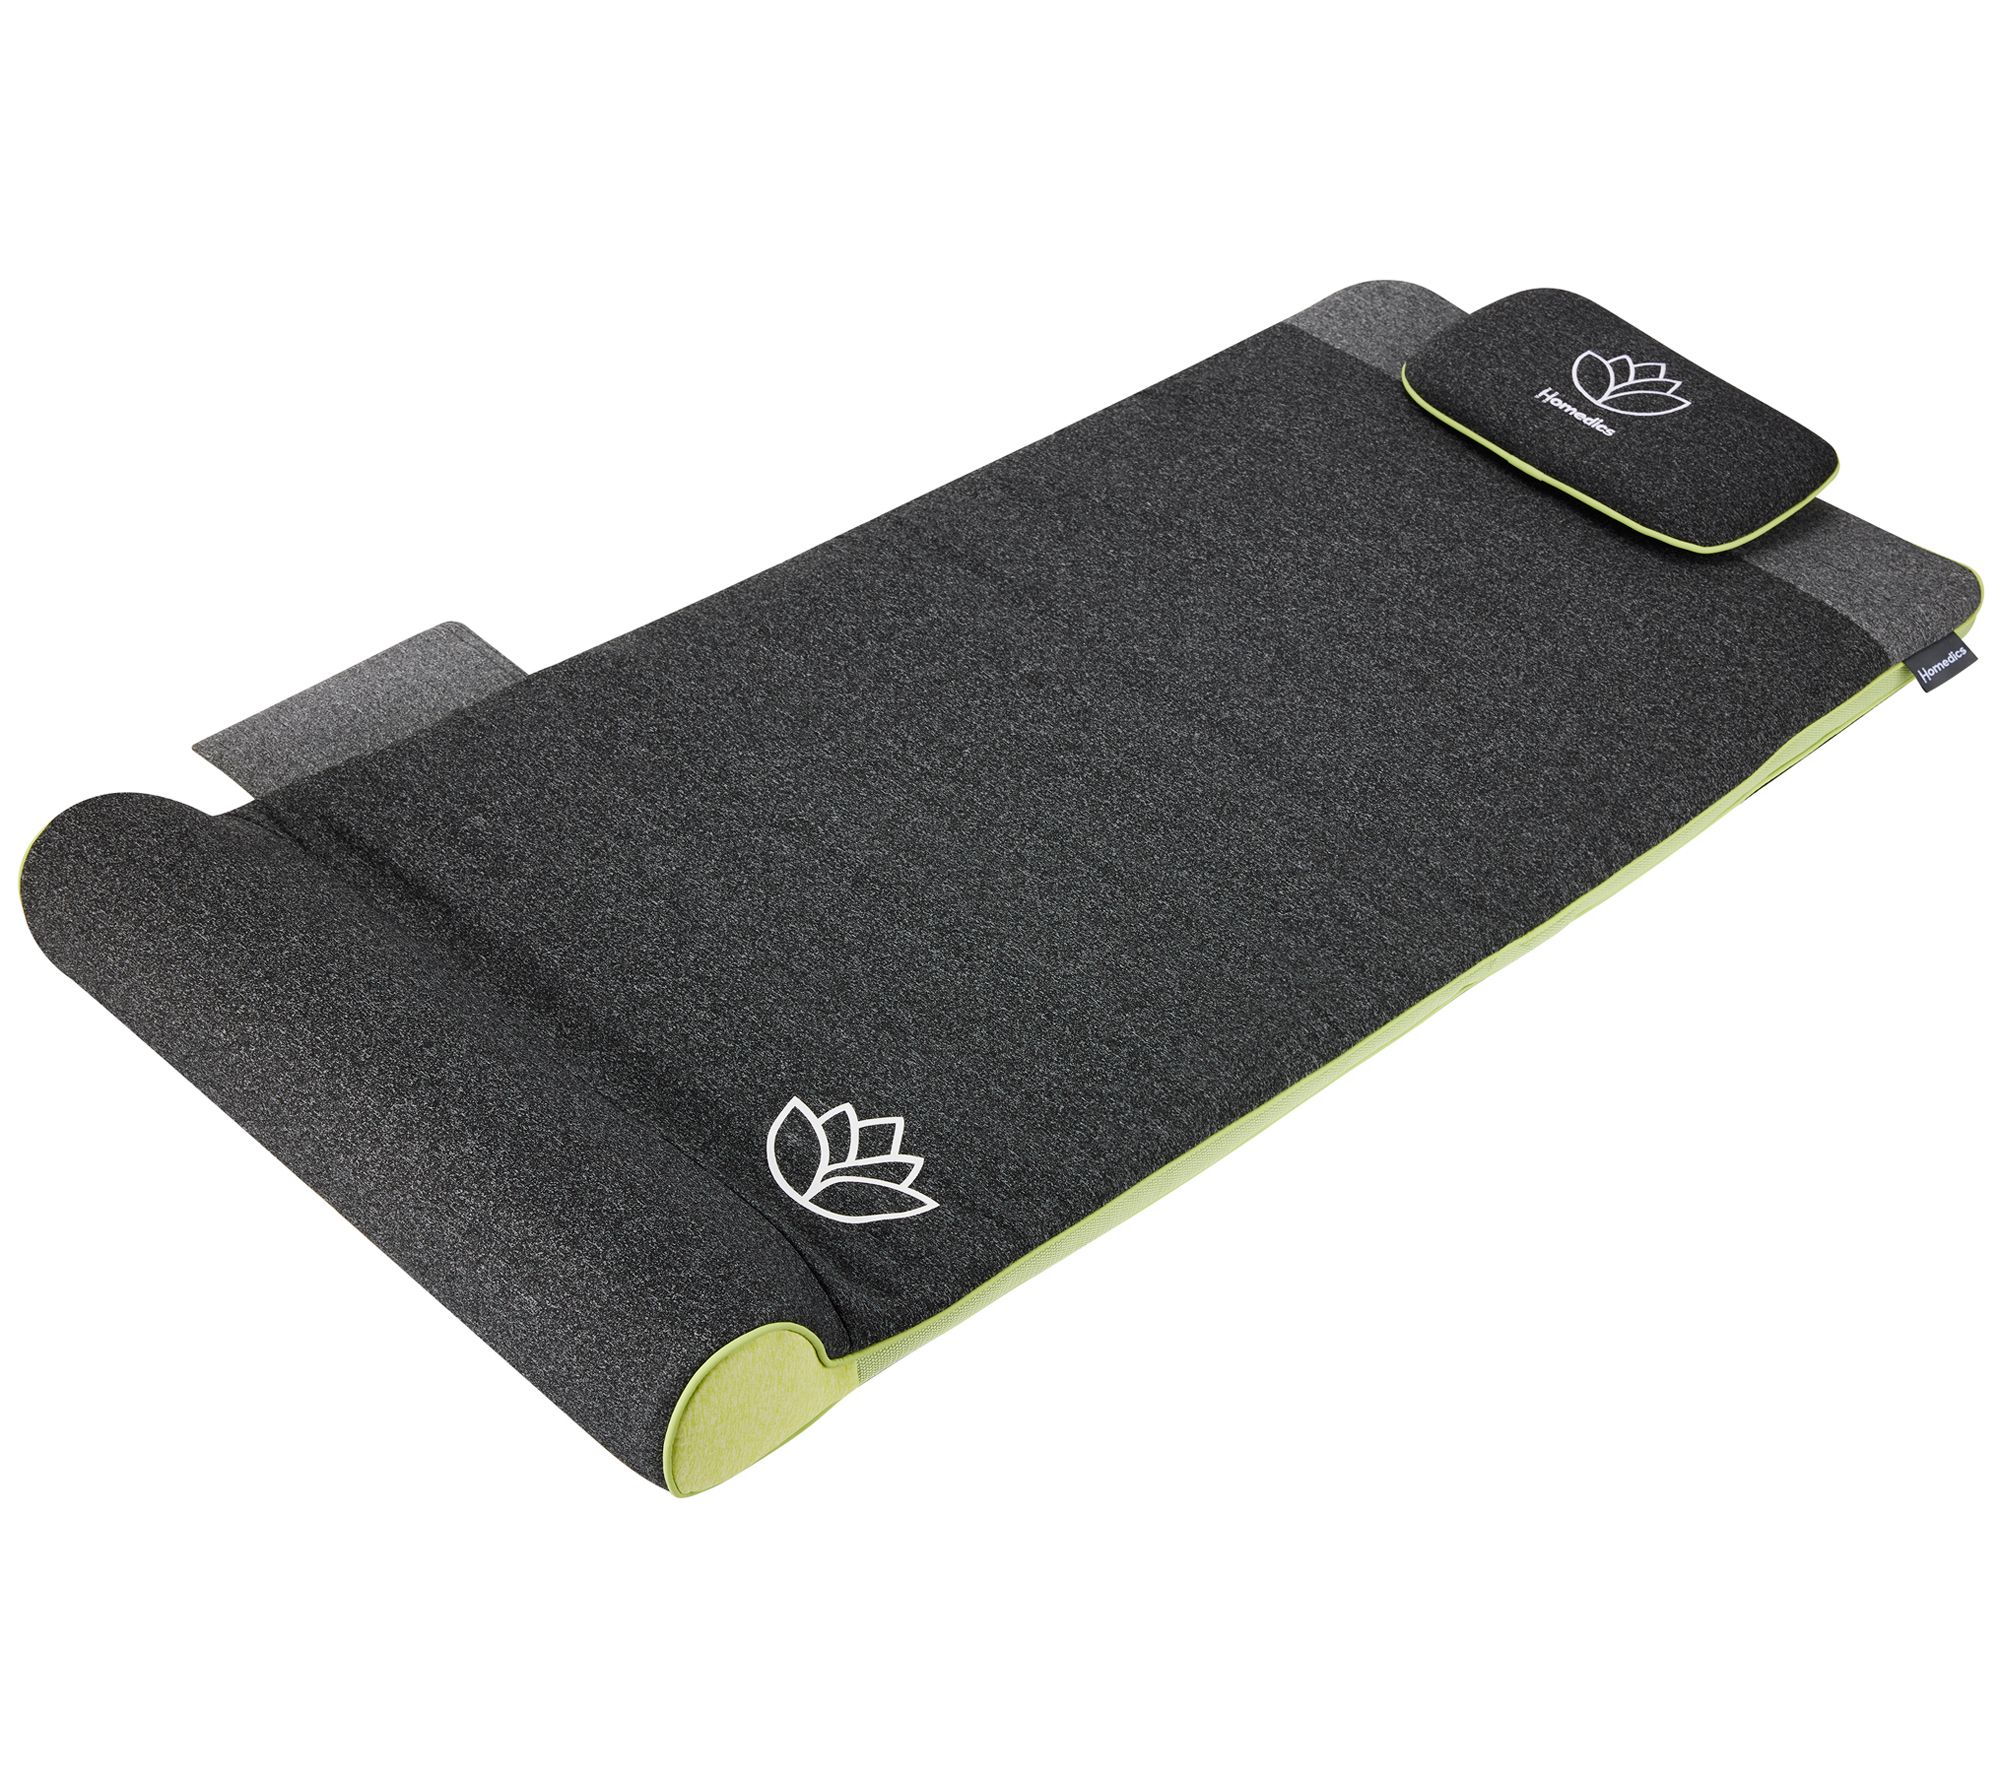 Review of the Relax Mat by Muscle Mat